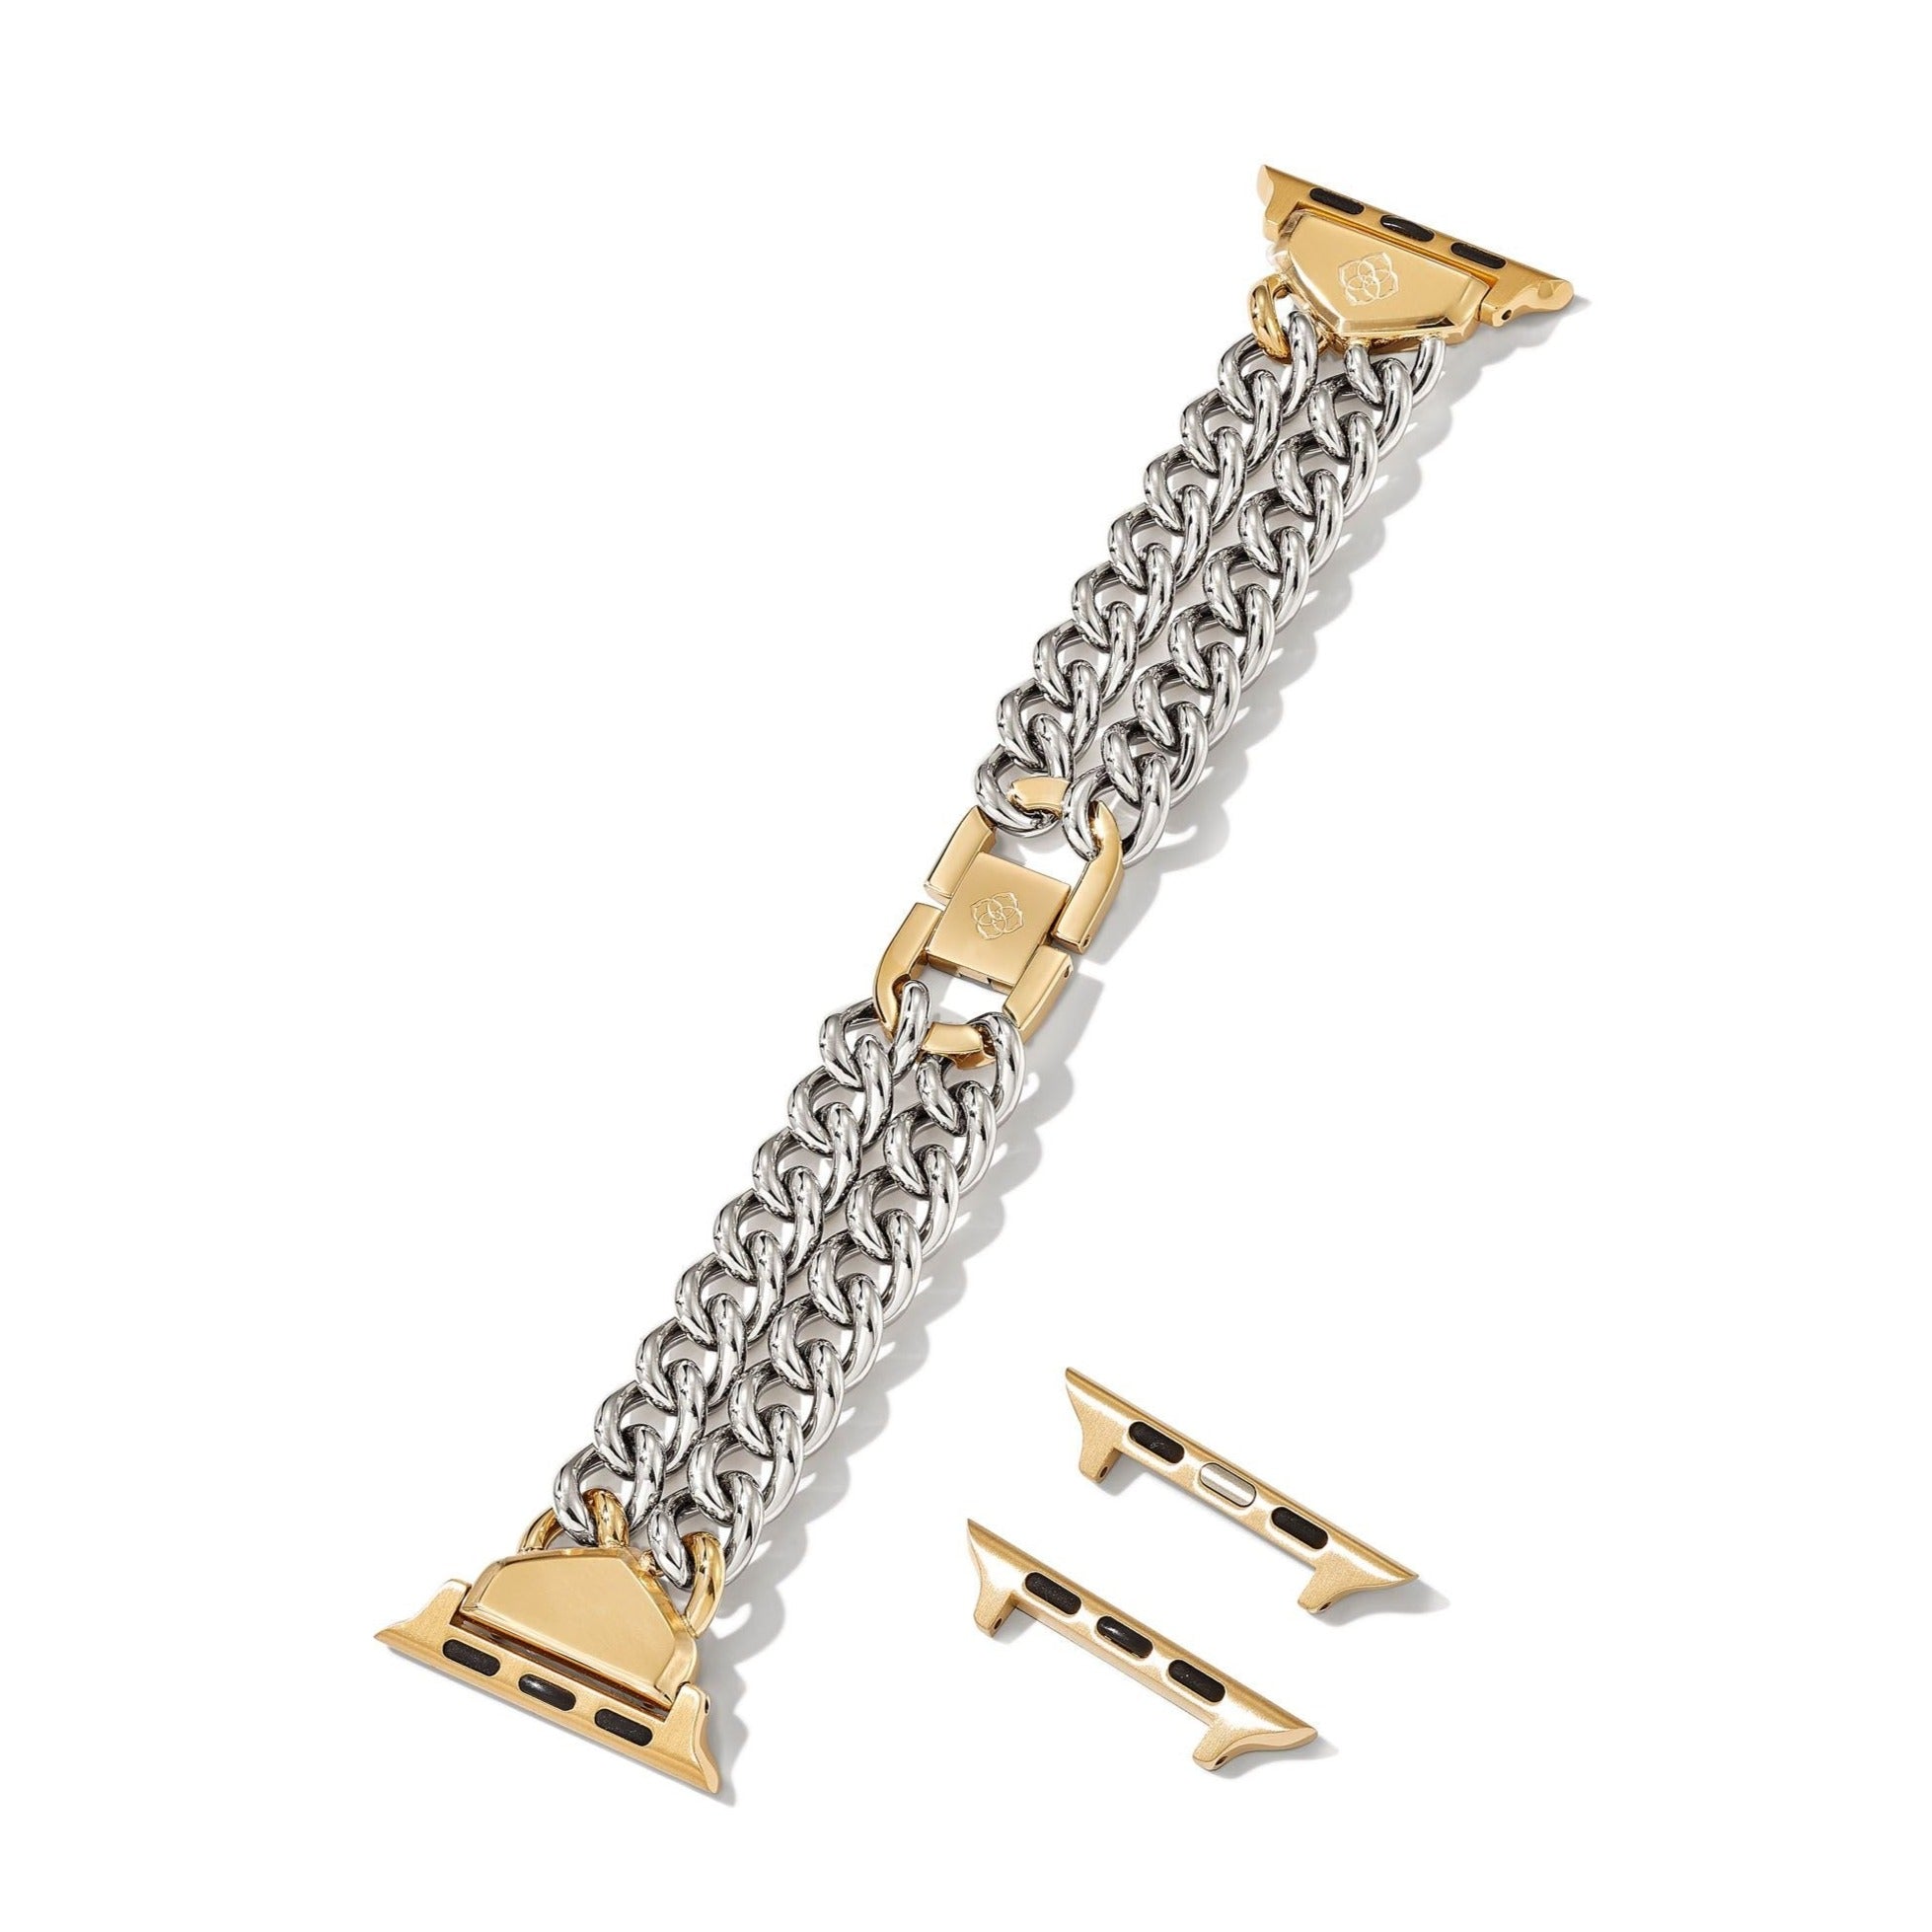 Kendra Scott | Whitley Double Chain Watch Band in Two Tone Stainless Steel